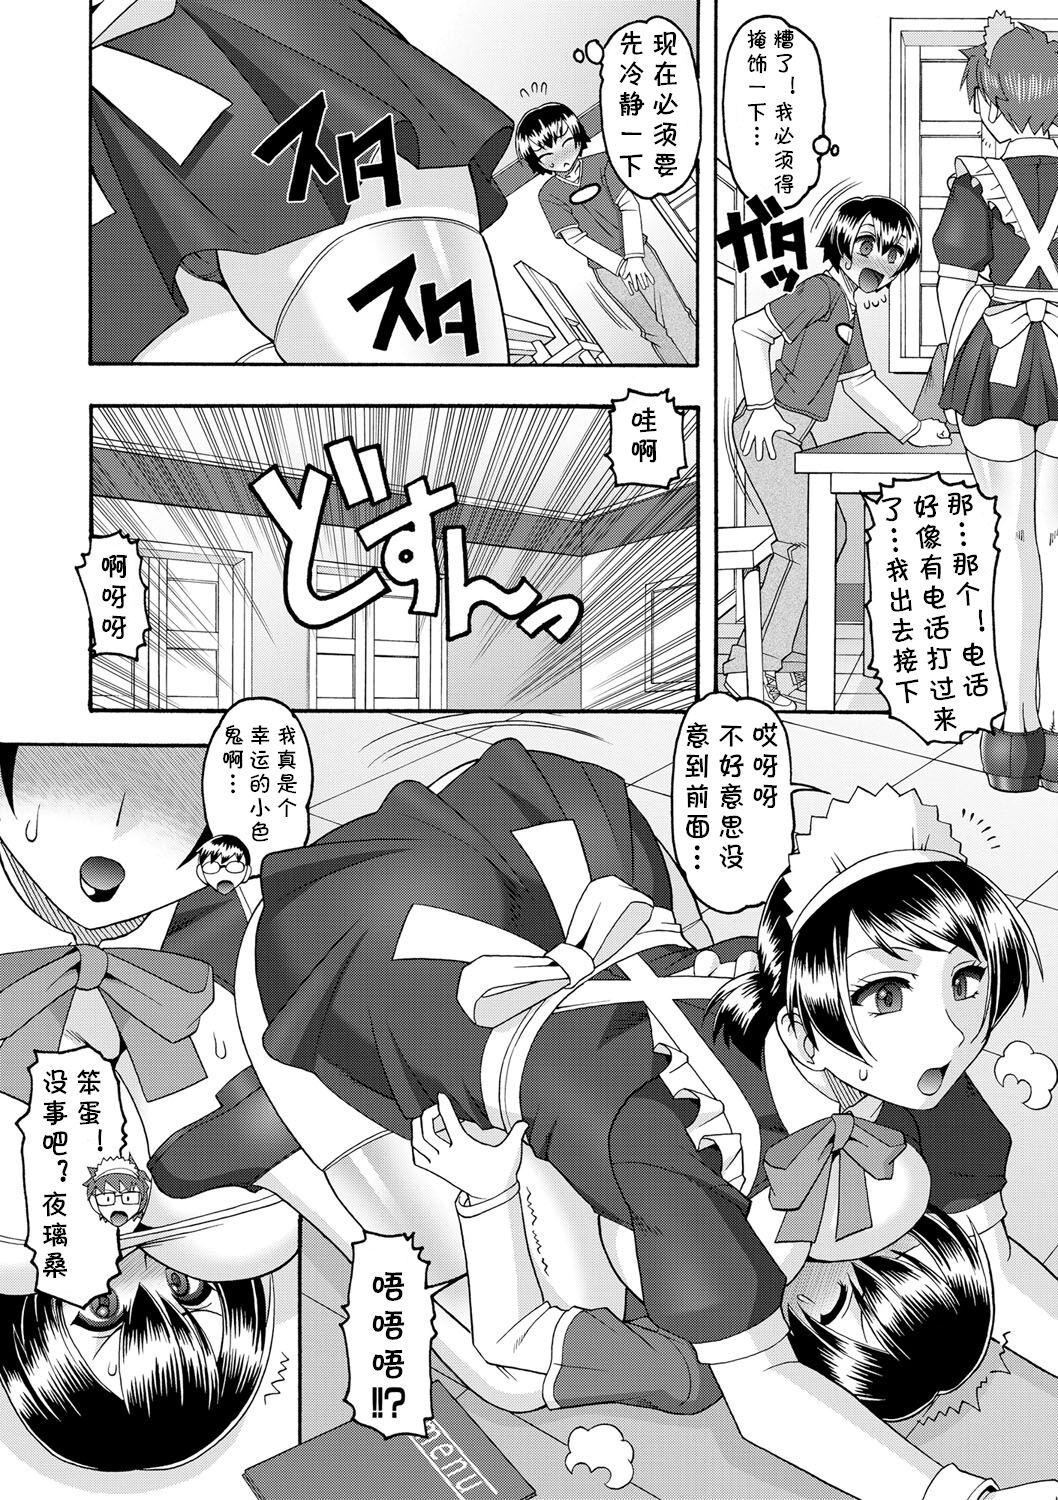 Maid-san OVER 30 Part 1 3